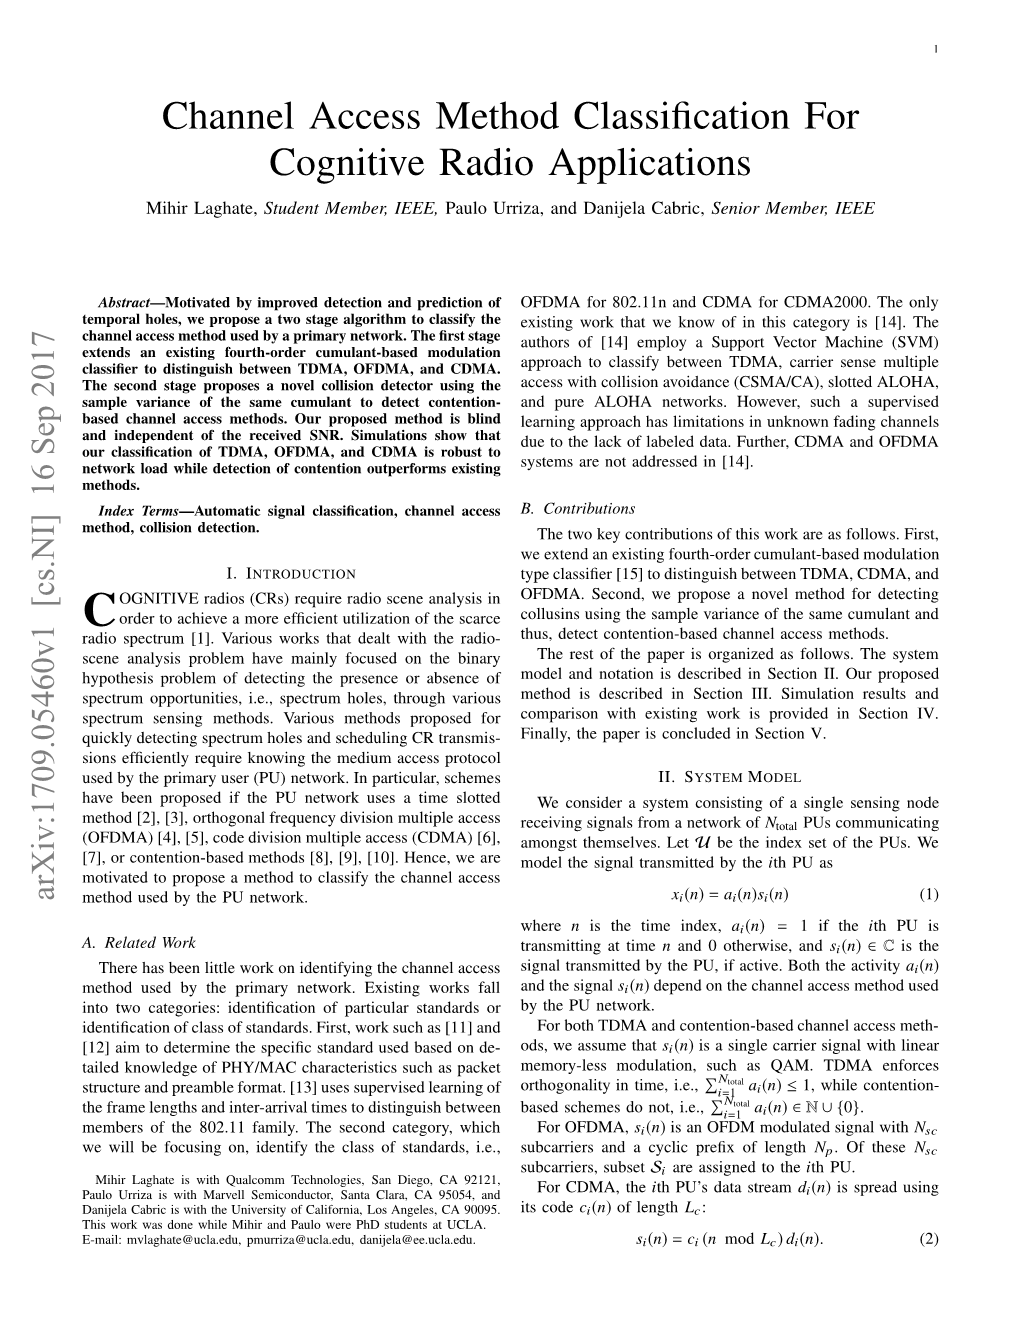 Channel Access Method Classification for Cognitive Radio Applications